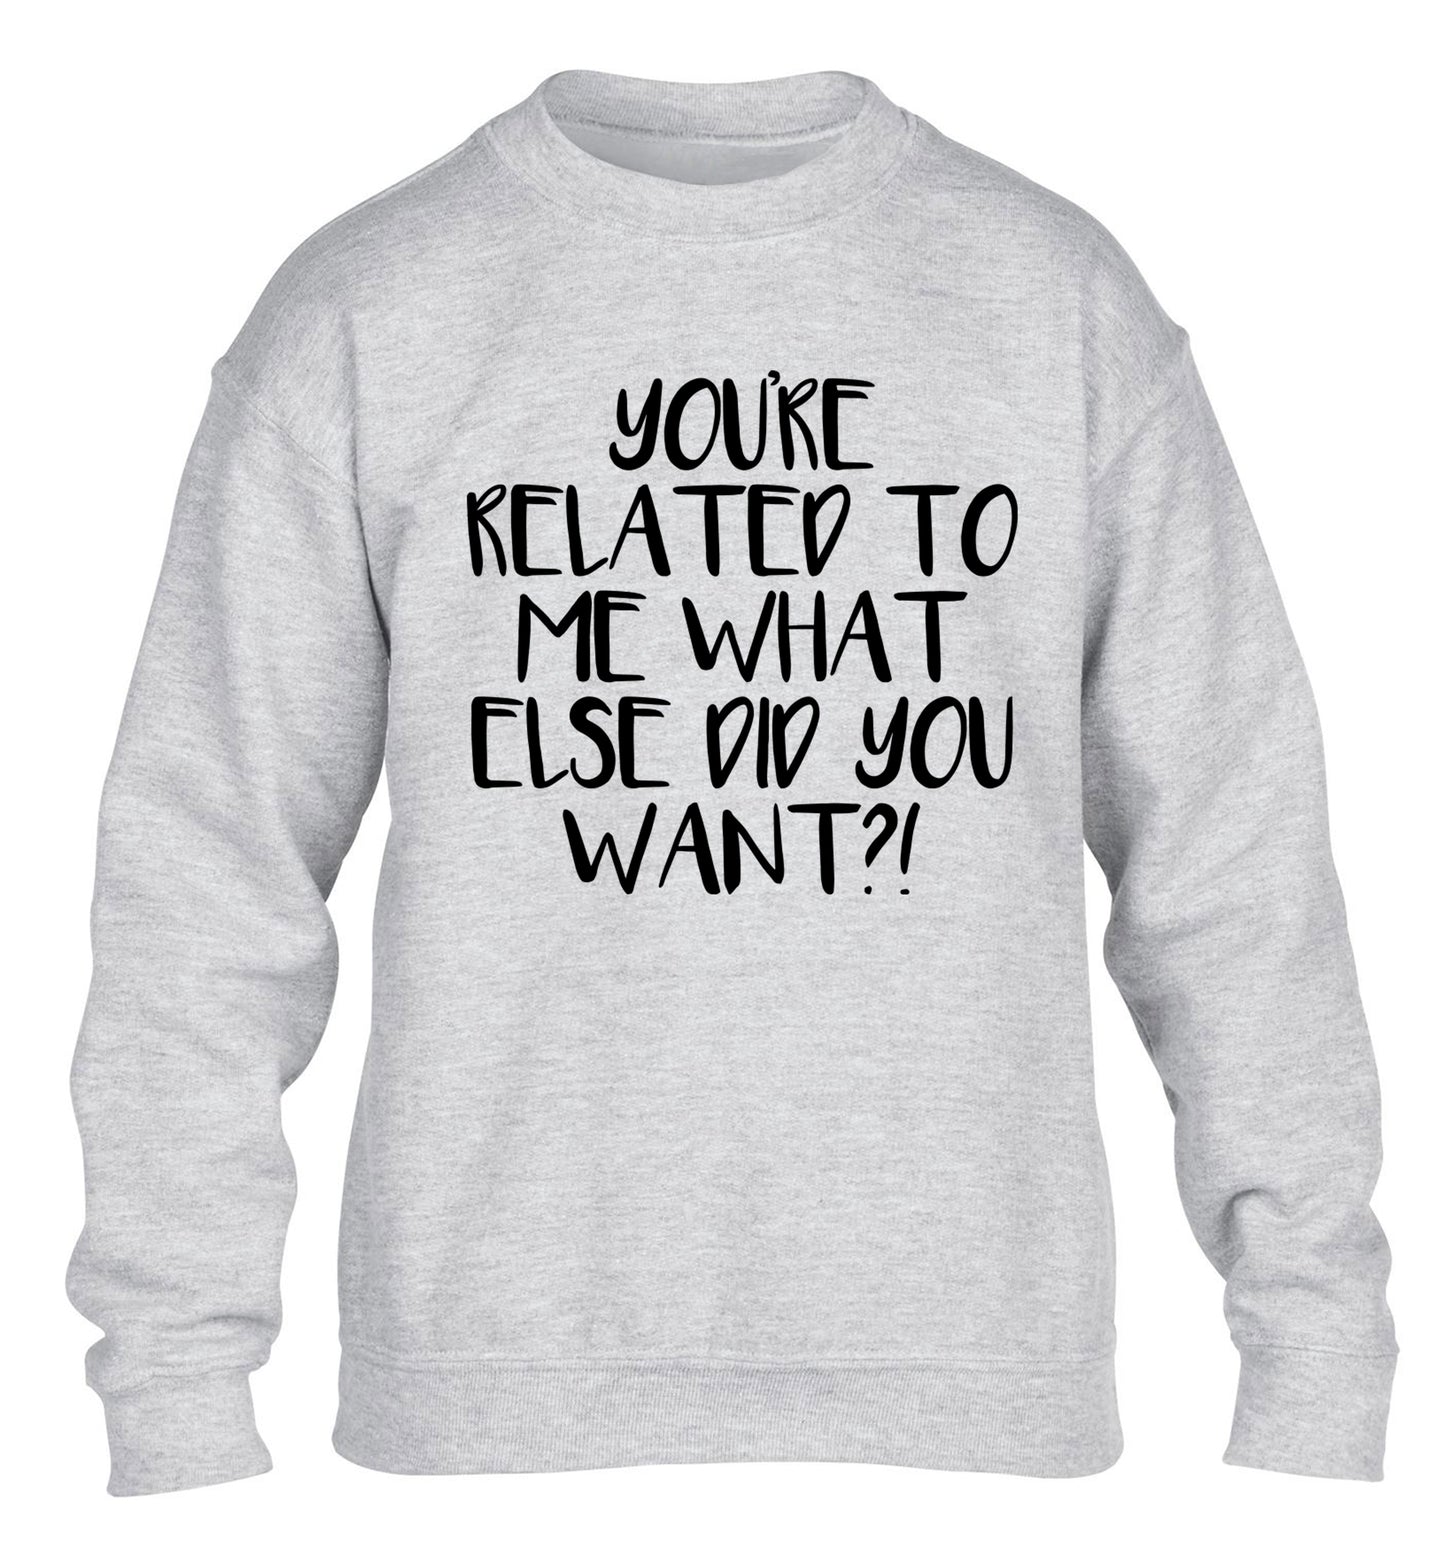 You're related to me what more do you want? children's grey sweater 12-13 Years